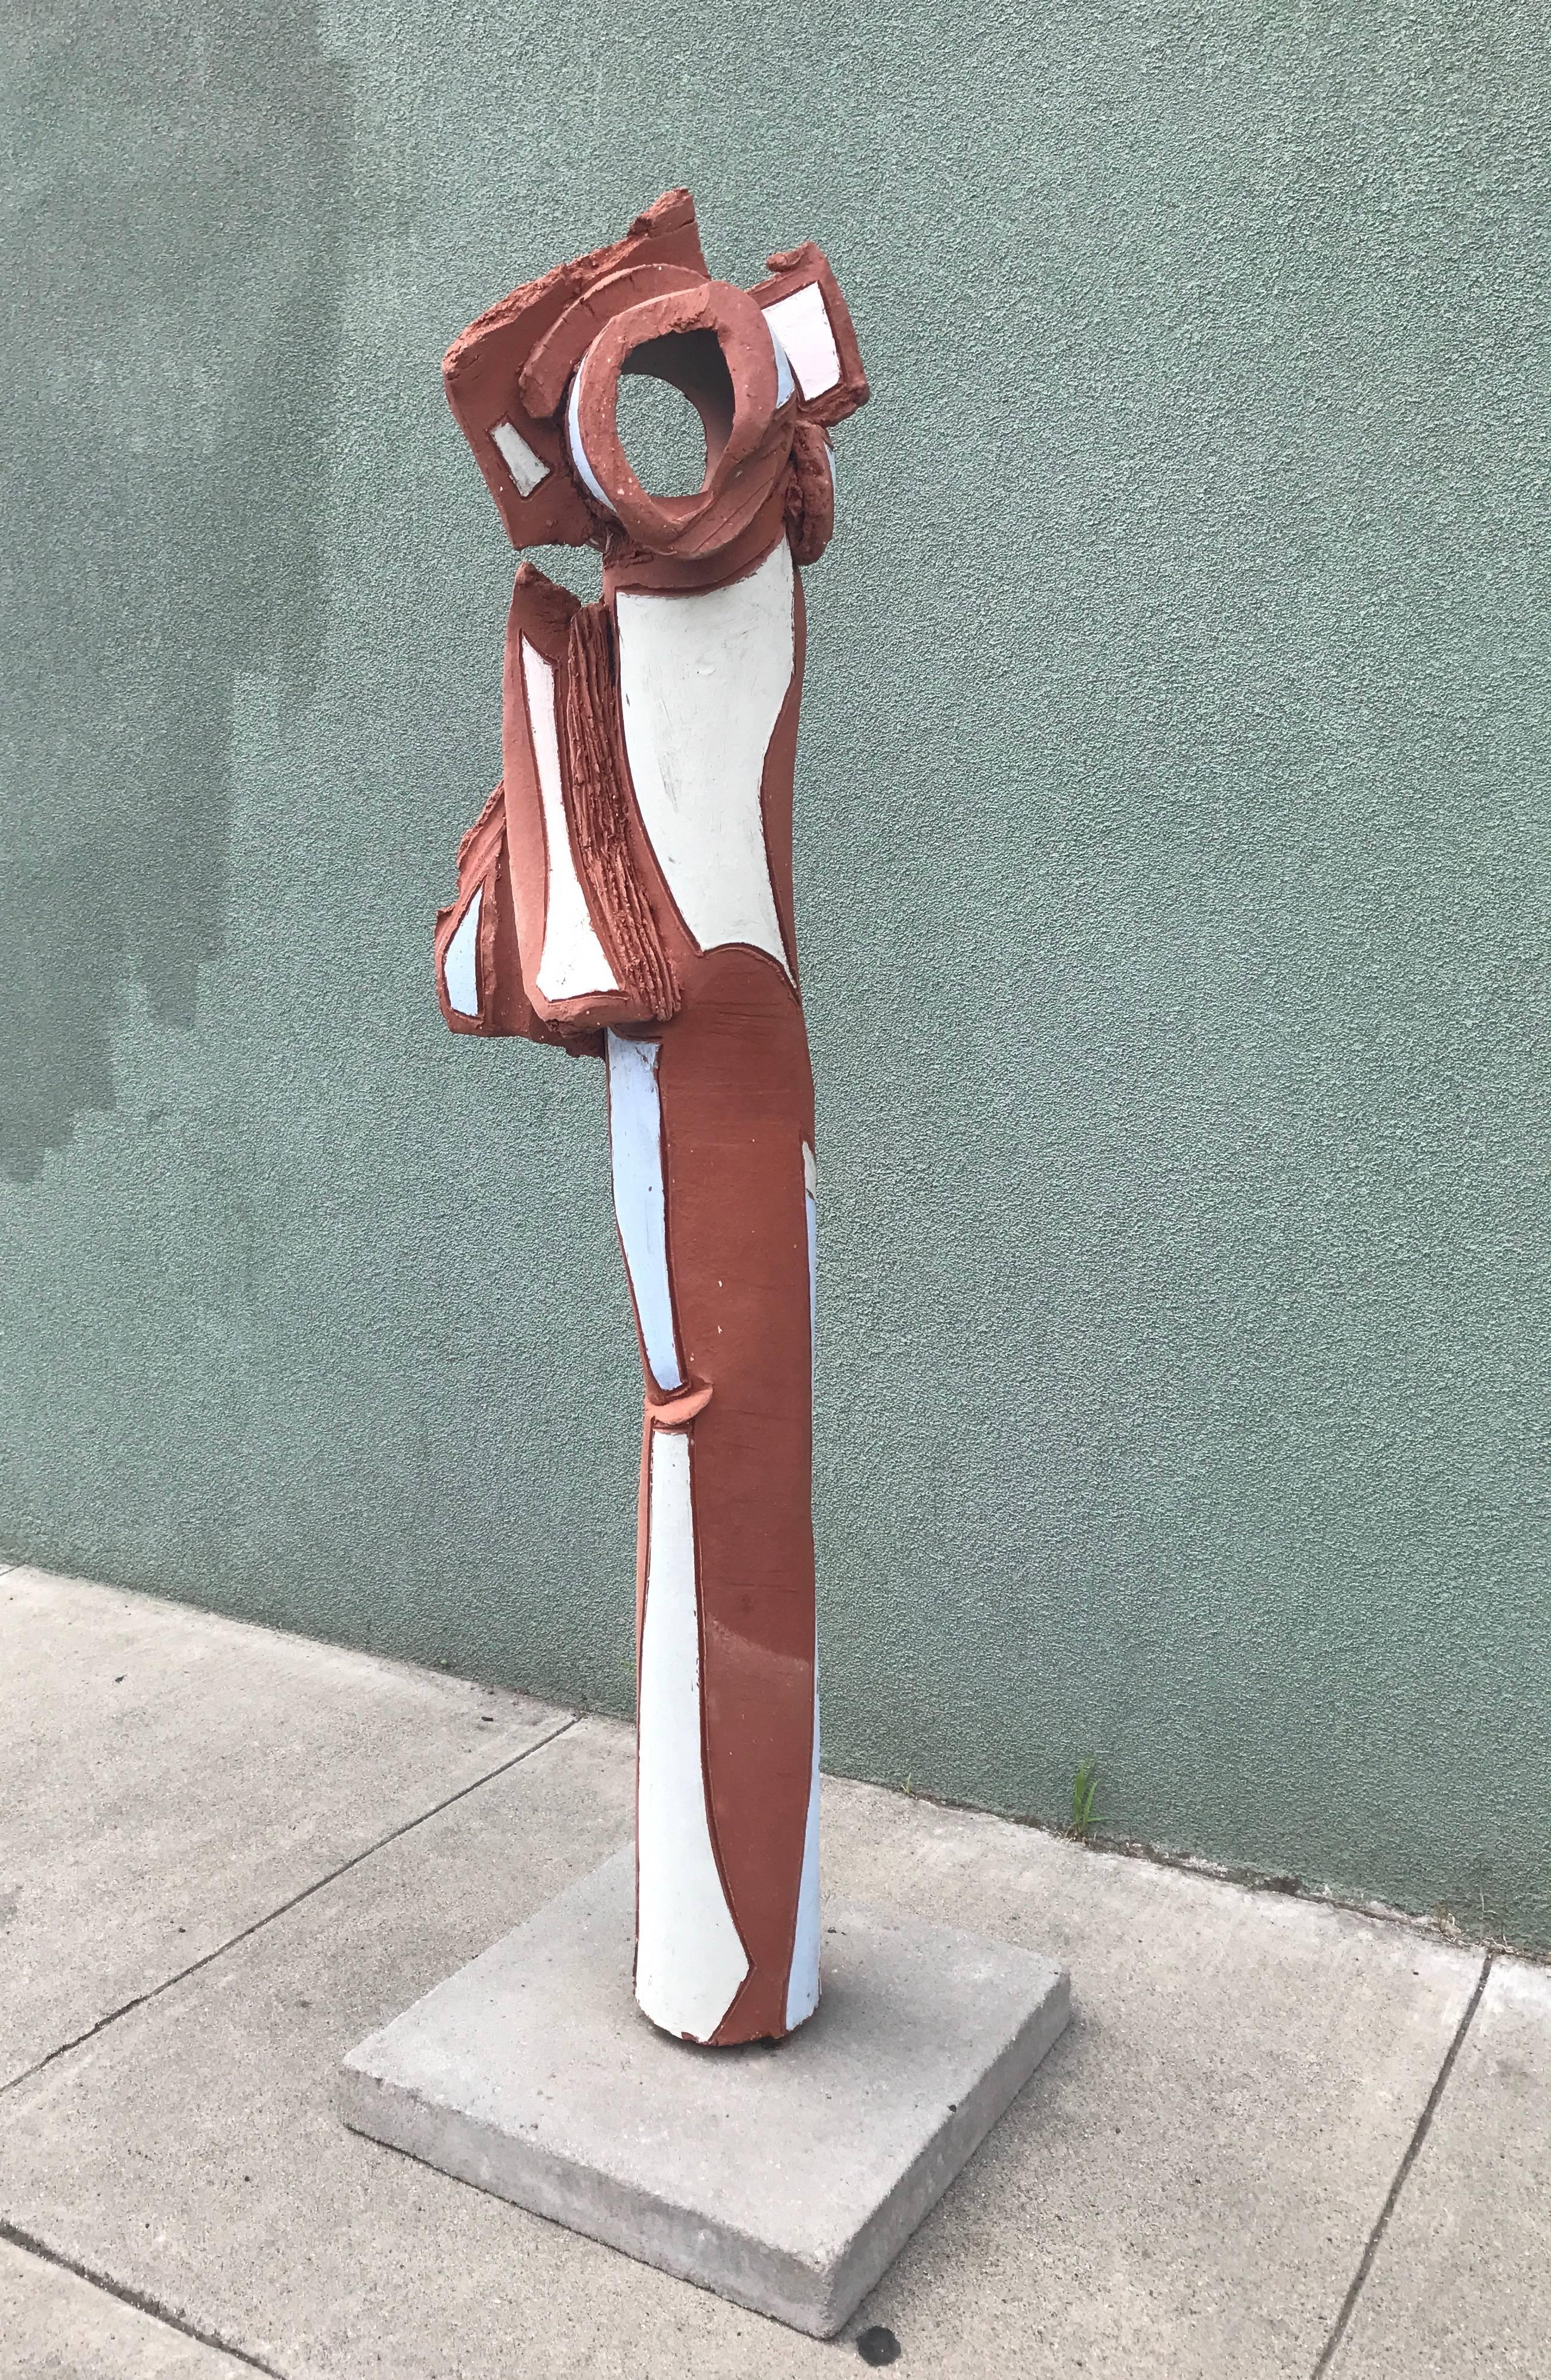 Late 20th Century Bay Area Large Glazed Ceramic Abstract or Brutalist TOTEM Sculpture #2 For Sale